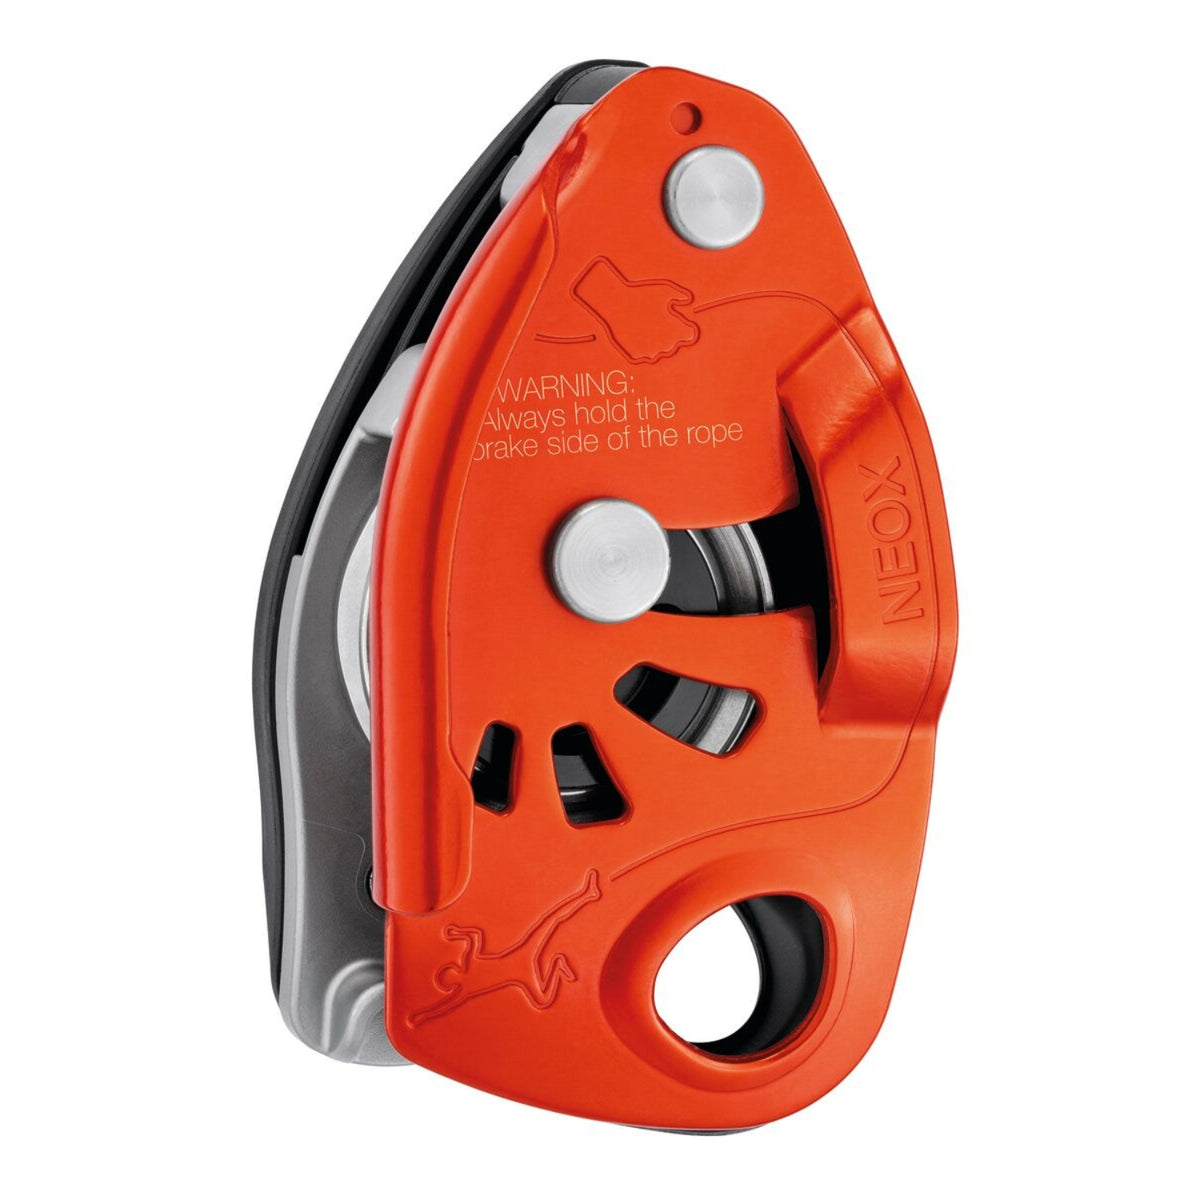 Petzl Neox orange assisted belay device